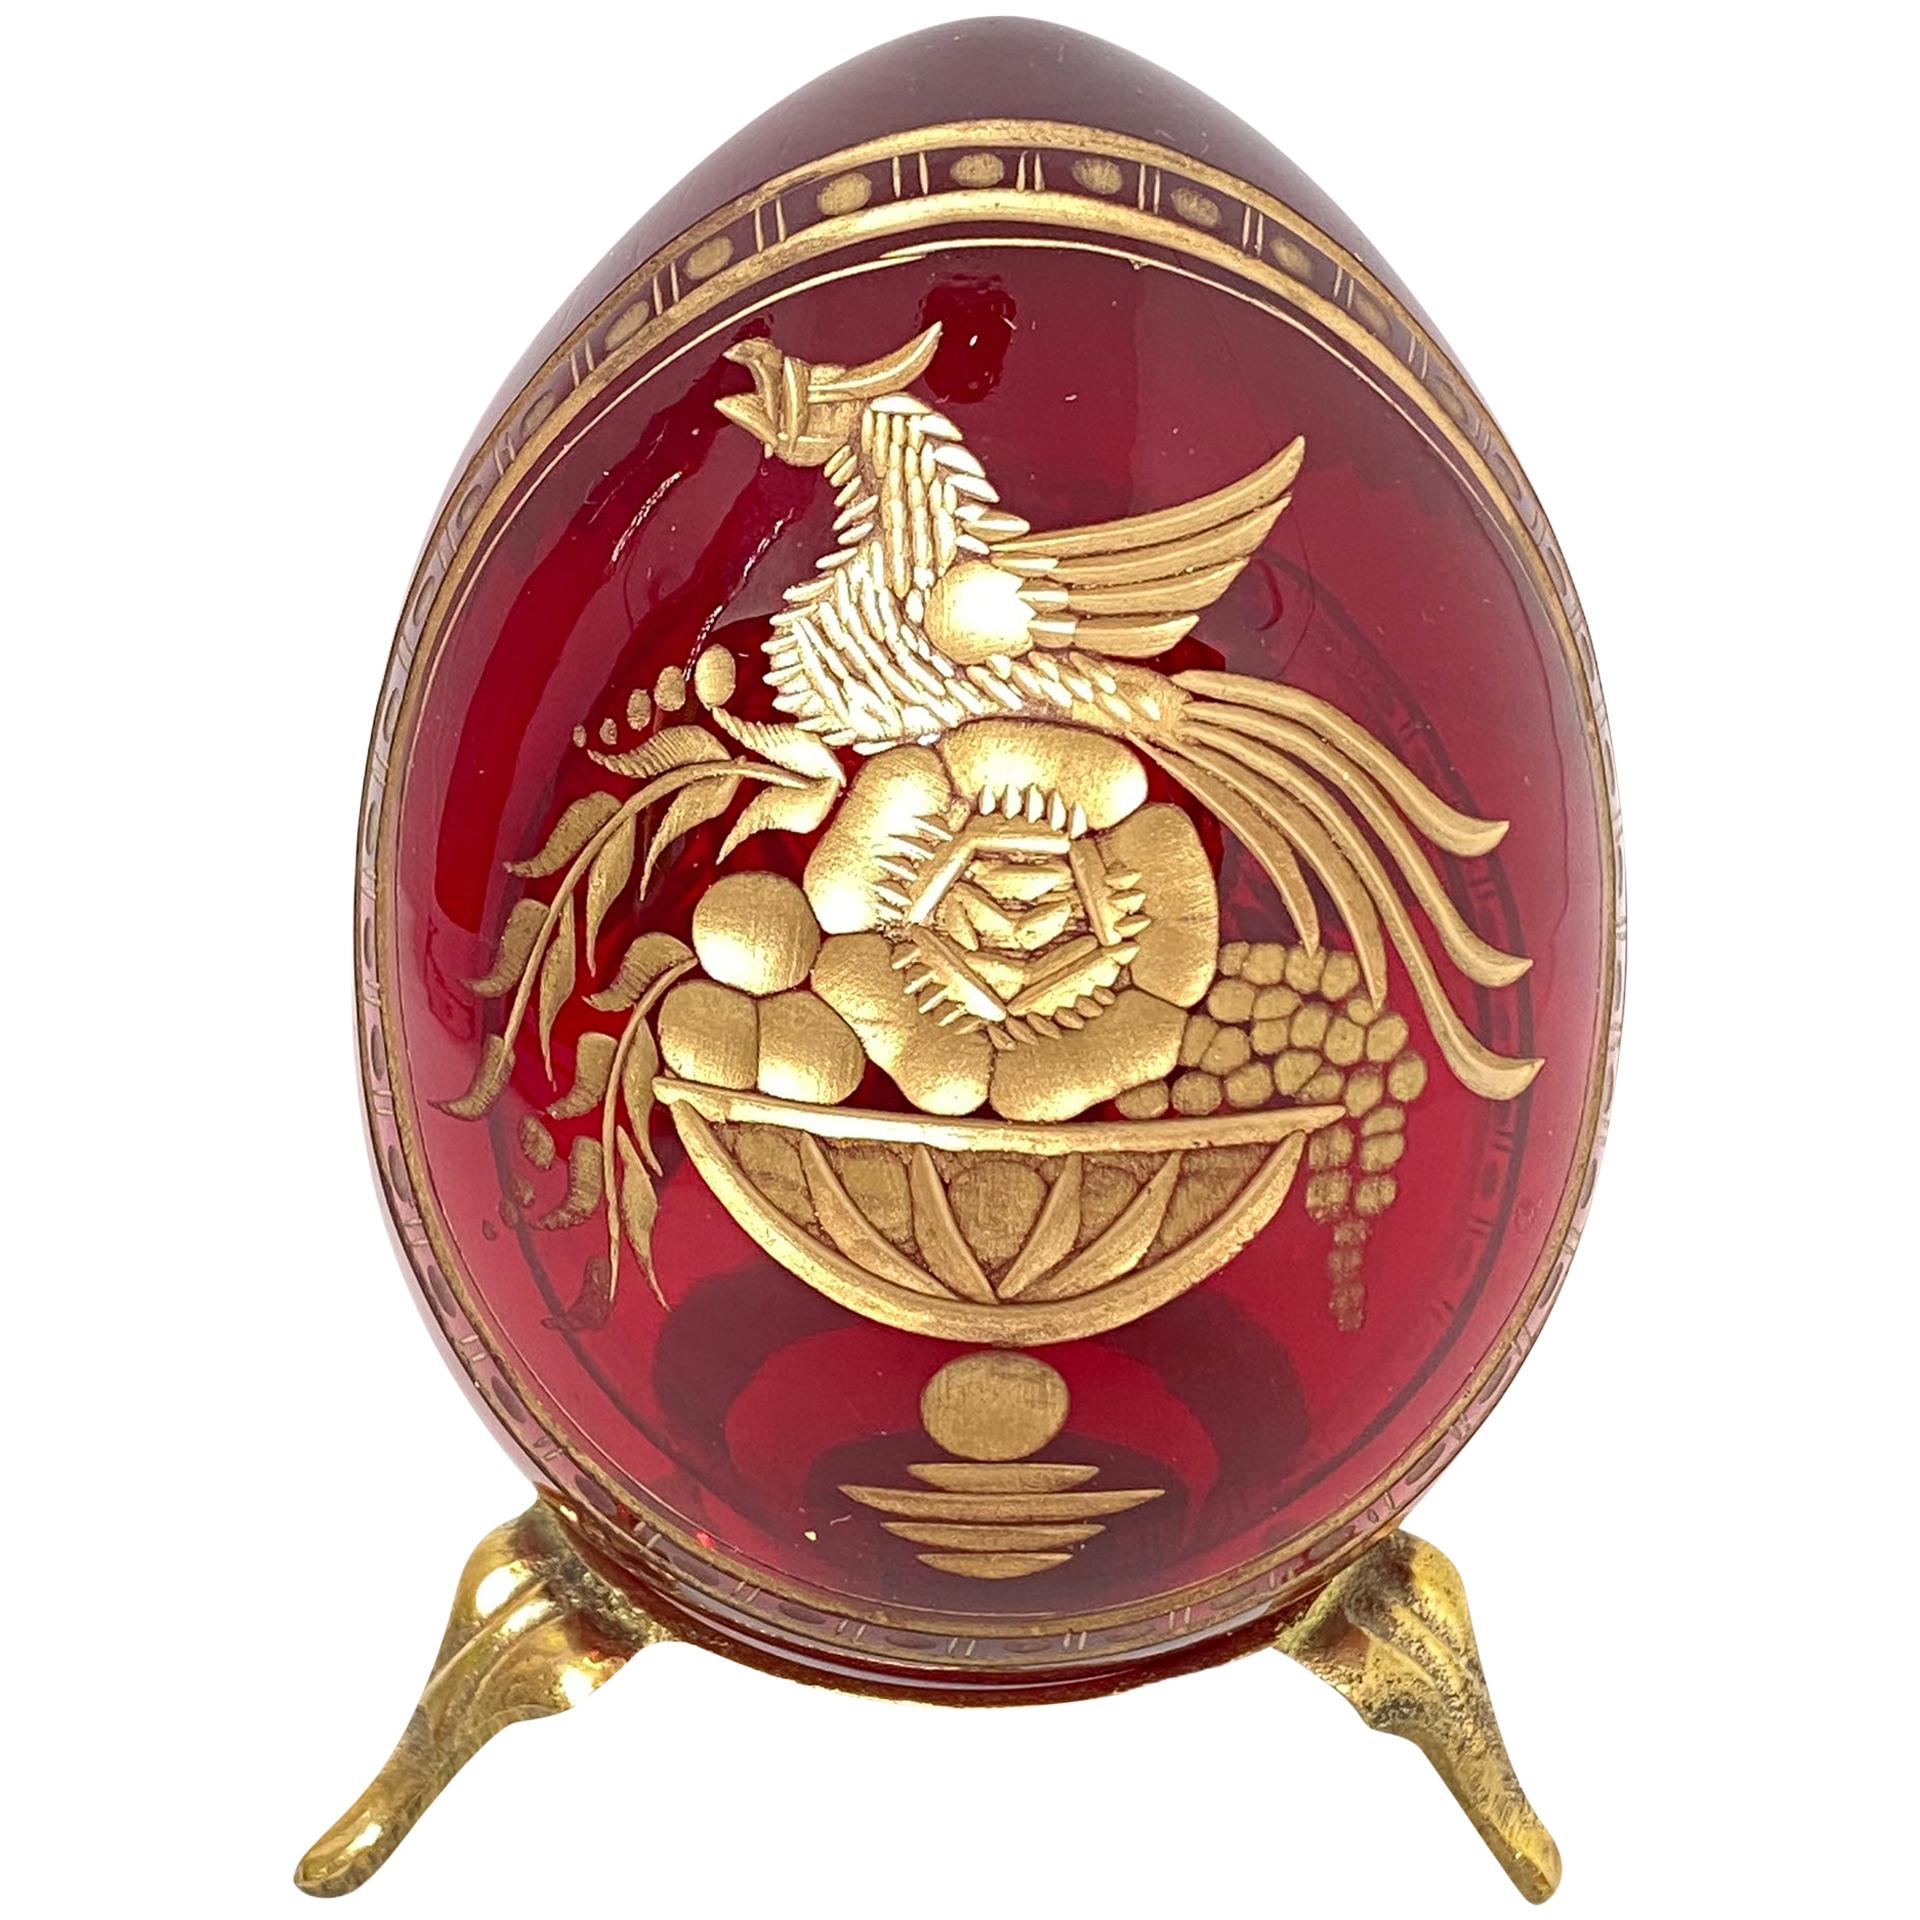 Vintage Faberge Russia Style Ruby Red Glass Egg with Etched Royal Crest Monogram